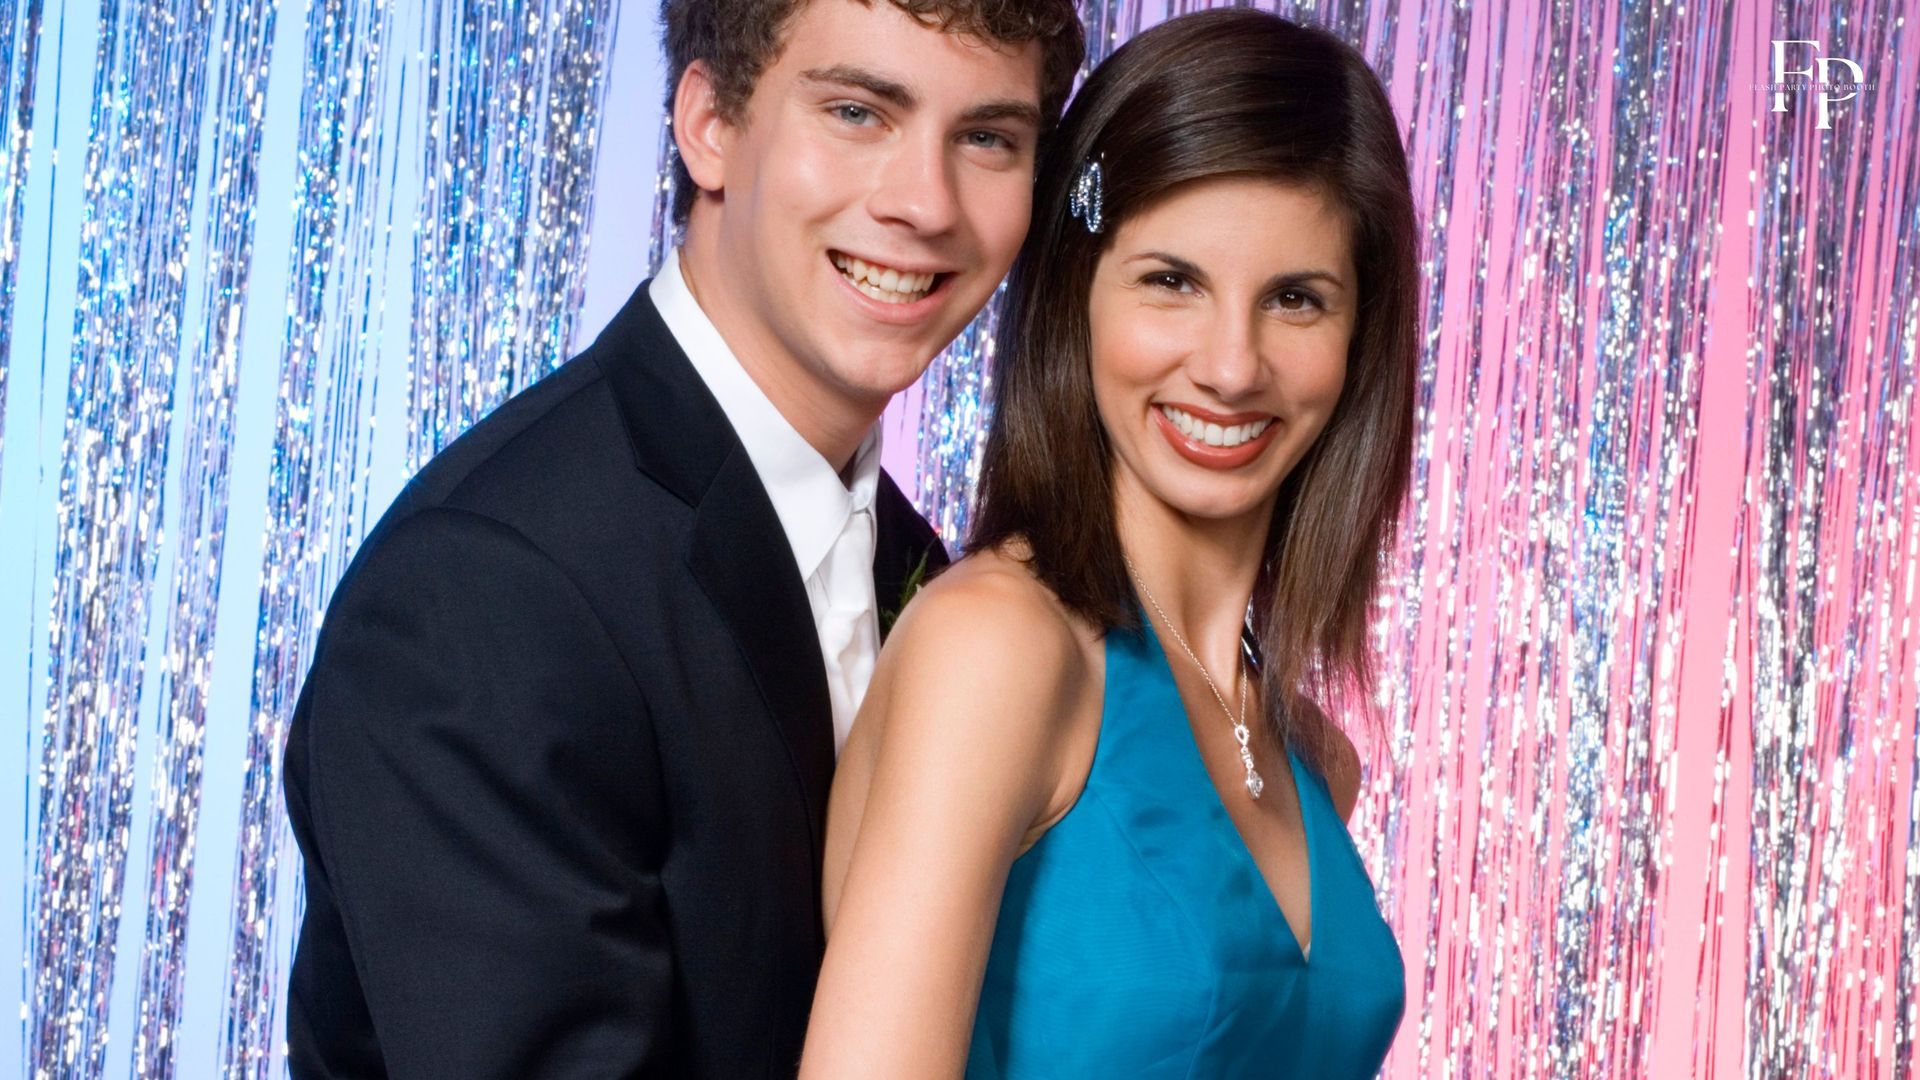 A couple posing at a photo booth set up for their prom party